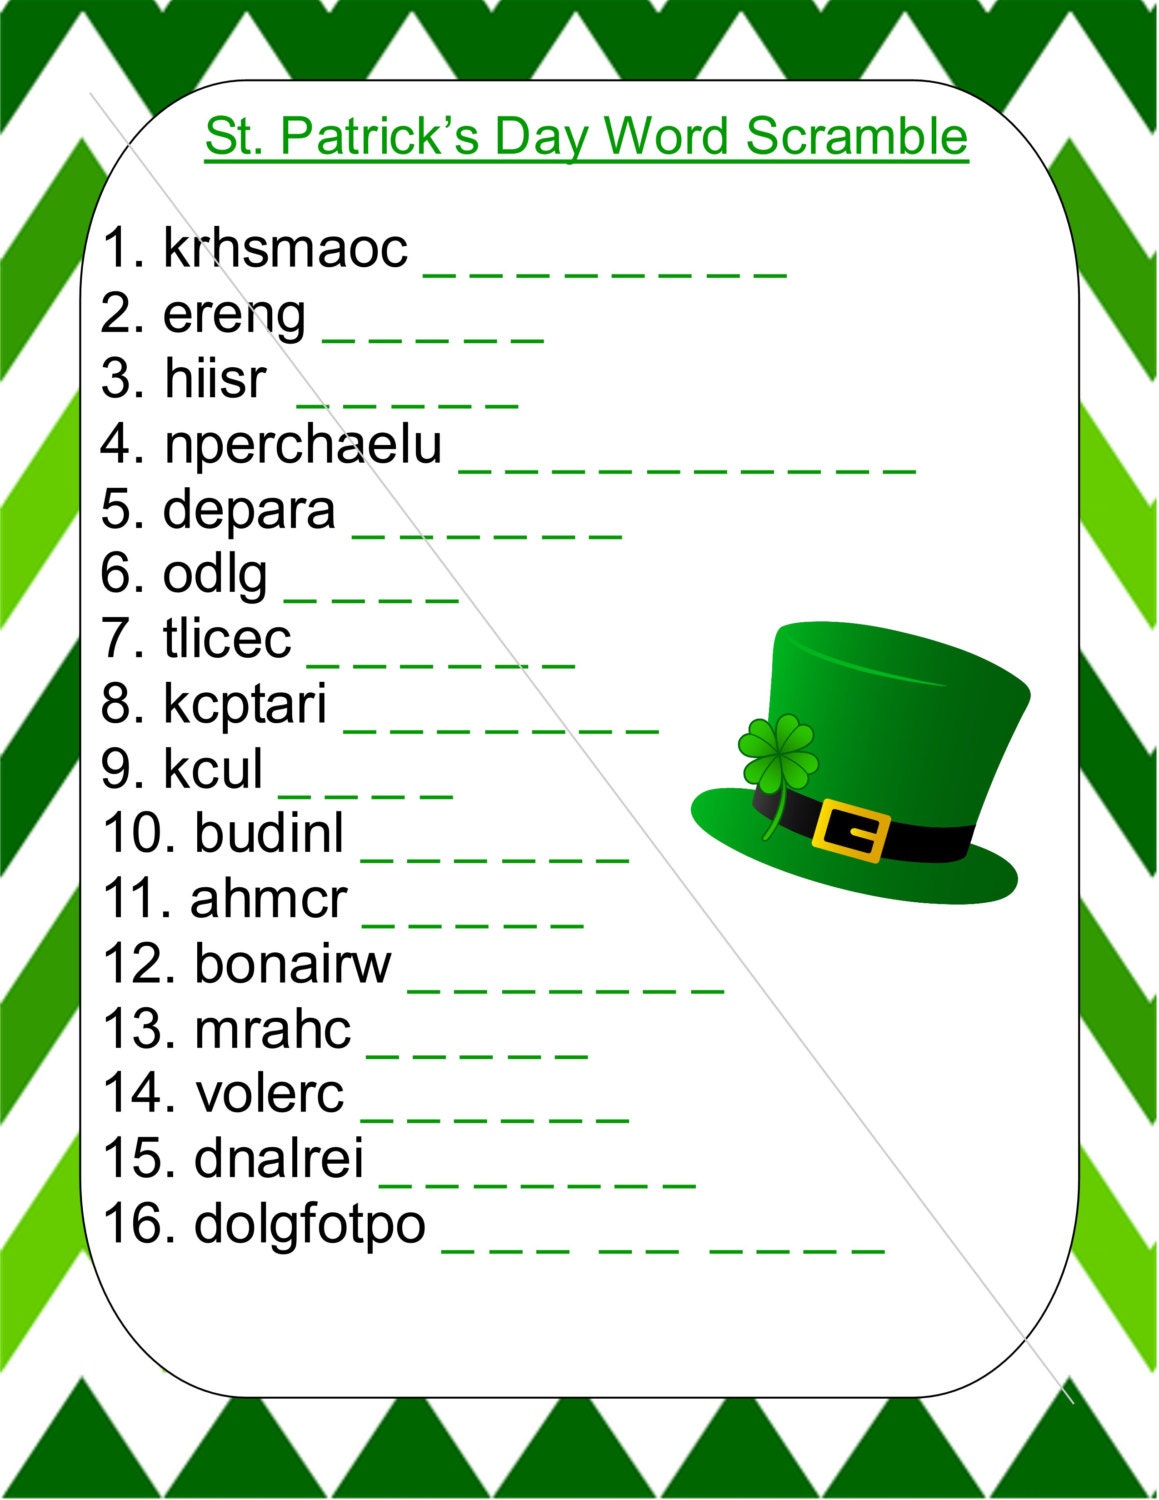 st-patrick-s-day-word-scramble-with-answers